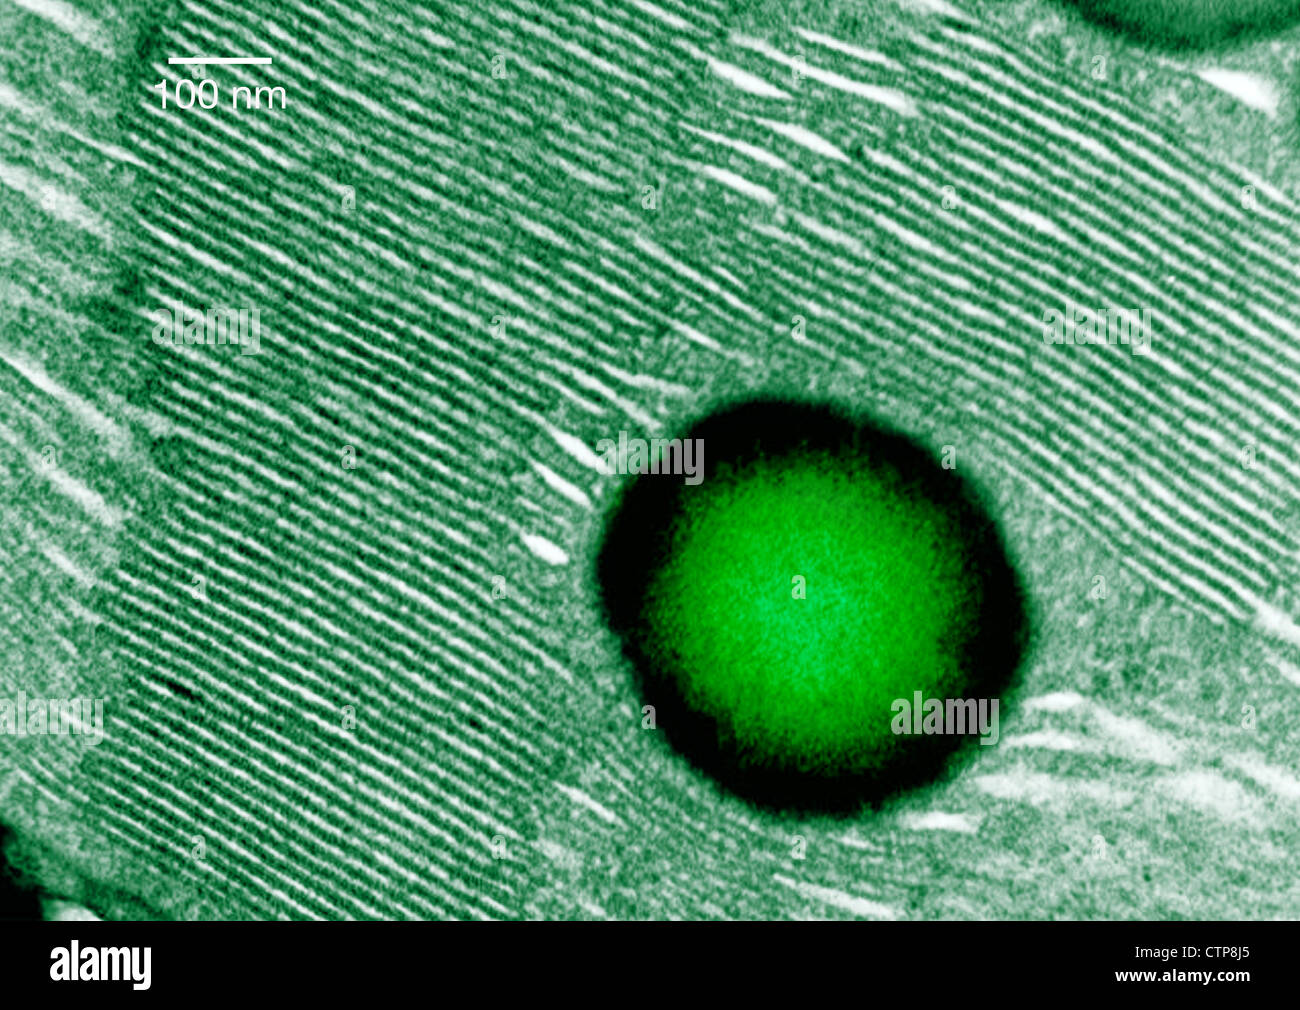 Transmission electron microscope image of a thin section cut from Begonia spp. leaf, showing a chloroplast Stock Photo